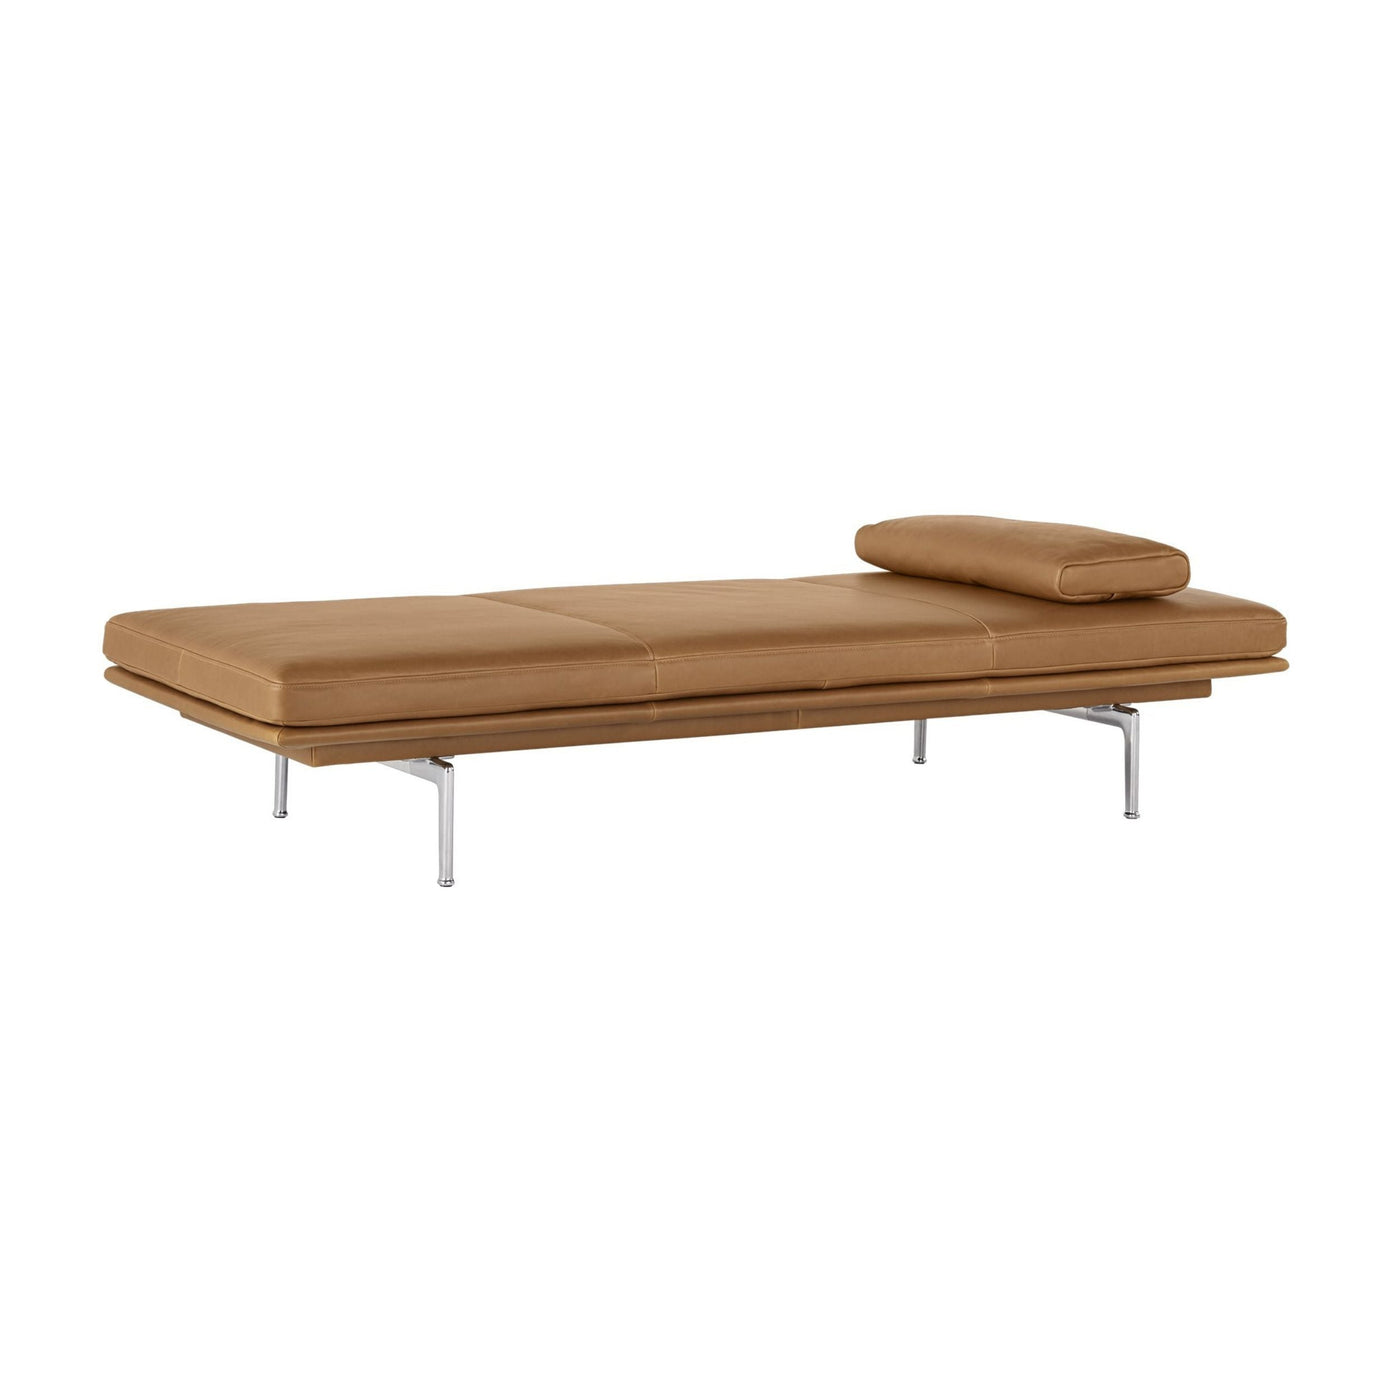 Muuto Outline Daybed Cushion, 70x30cm in cognac refine leather. Shop online at someday designs. #colour_cognac-refine-leather